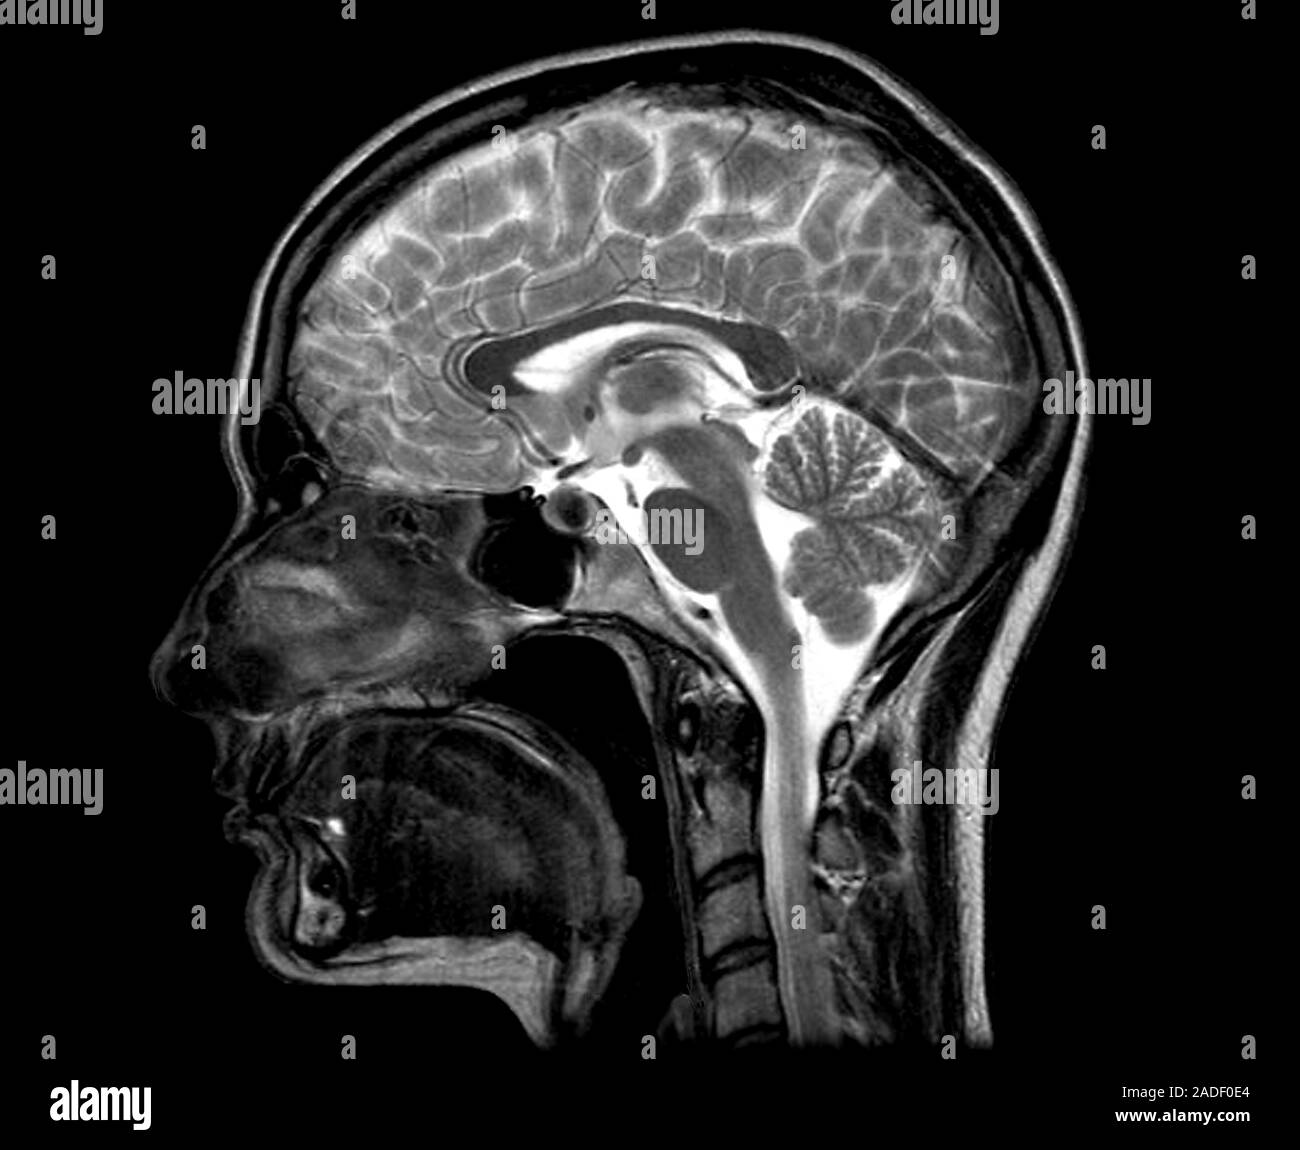 Human head and brain. Magnetic resonance imaging (MRI) scan of a ...